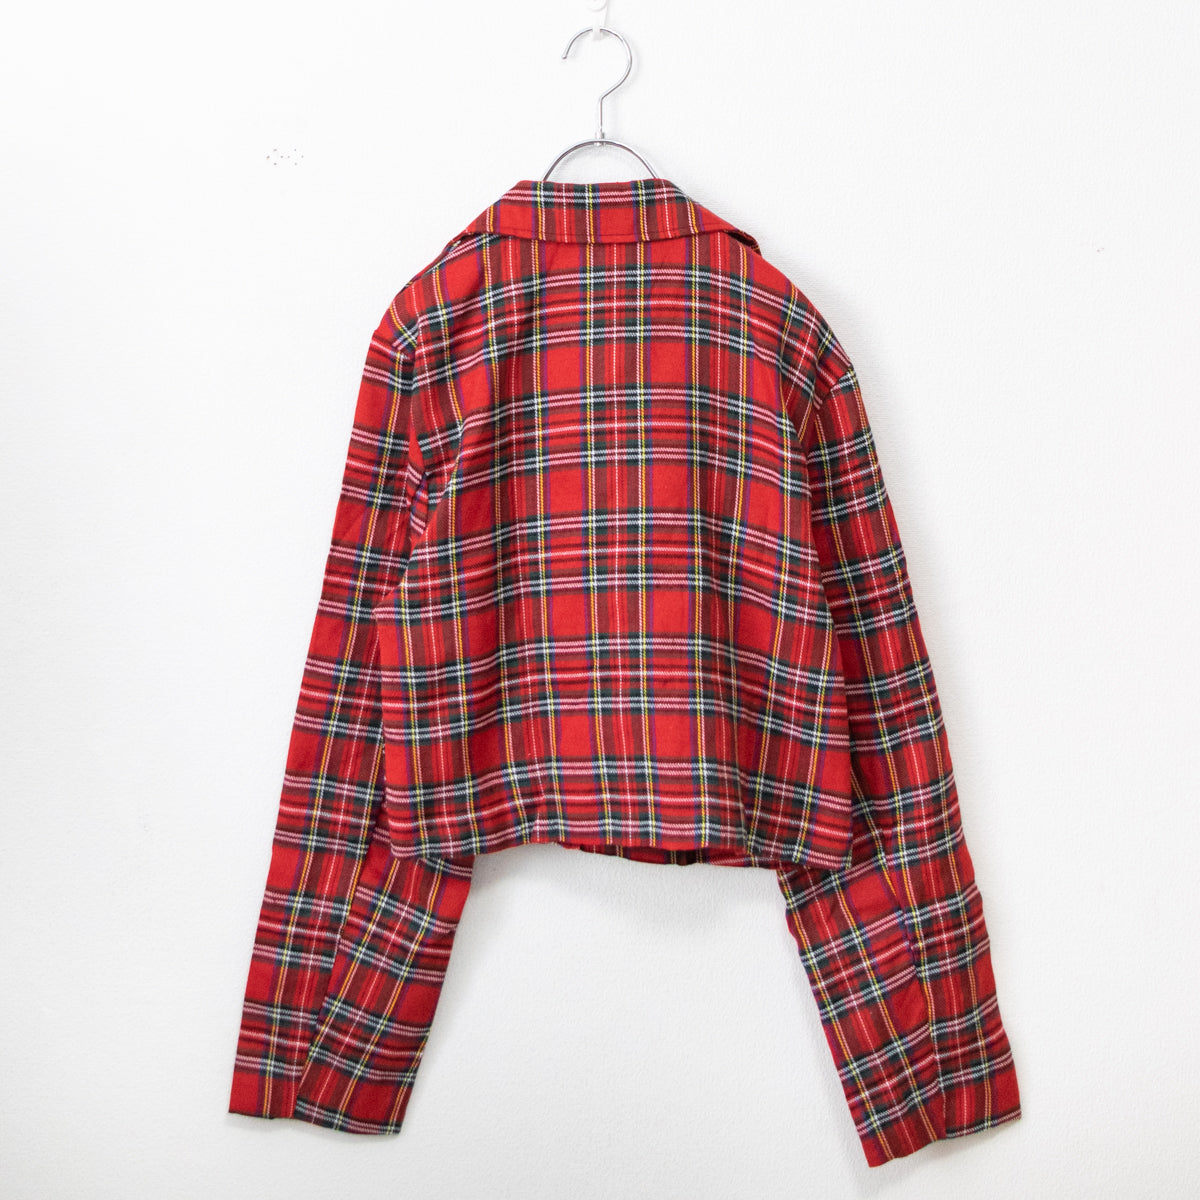 ACDC Rag Wing Heart Jacket Red Tartan Check - YOUAREMYPOISON